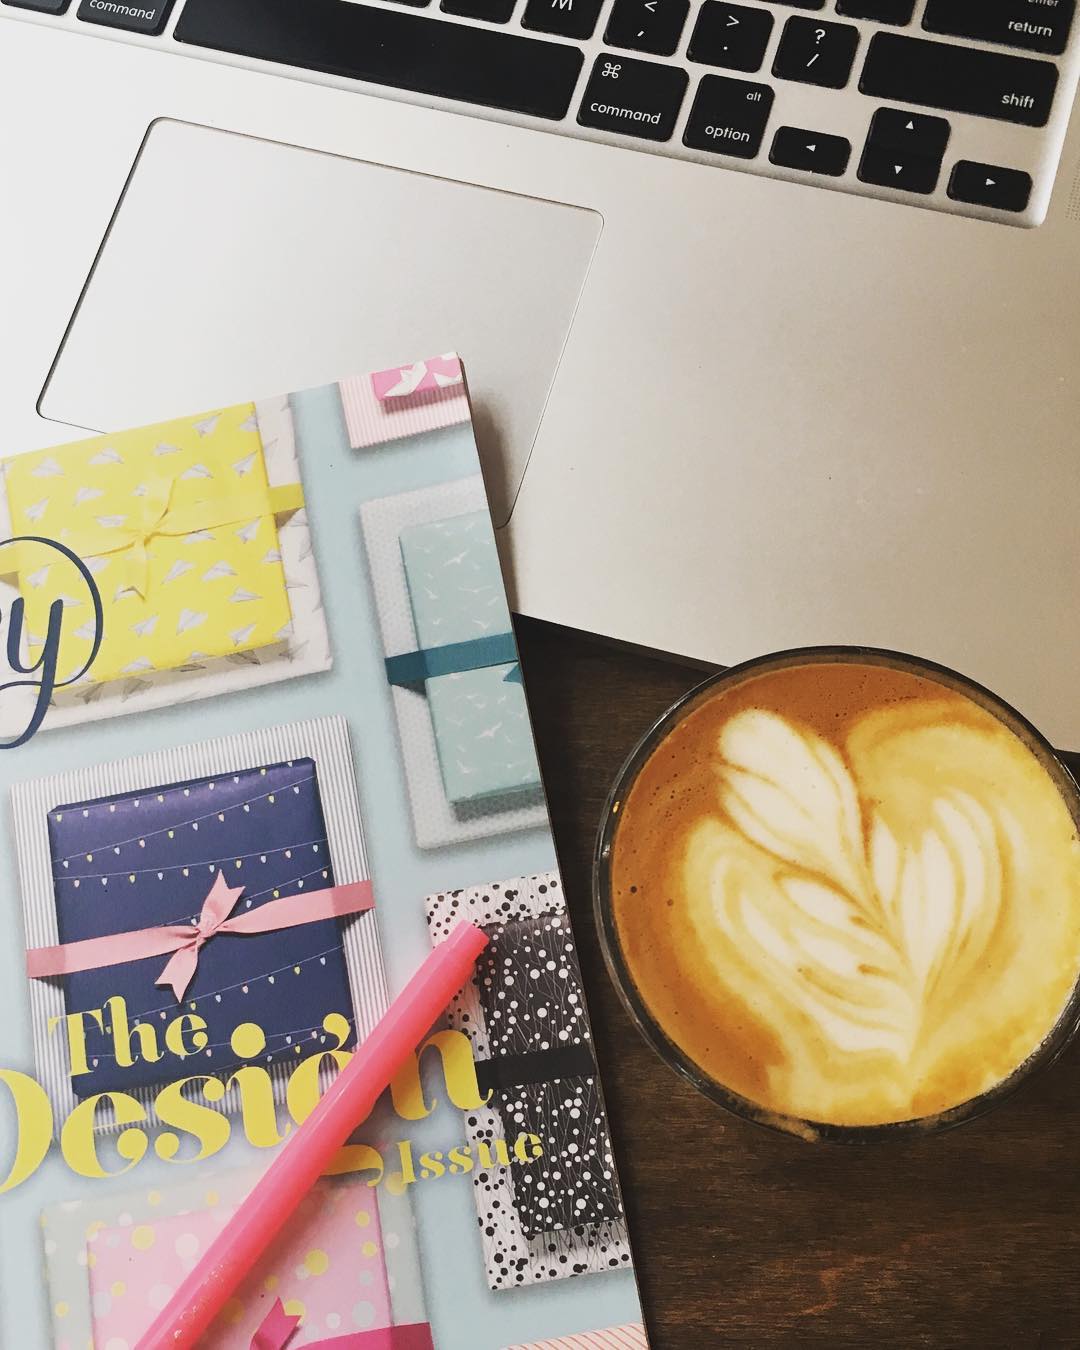 Spending a little QT with our fall issue today! Have you received yours yet?